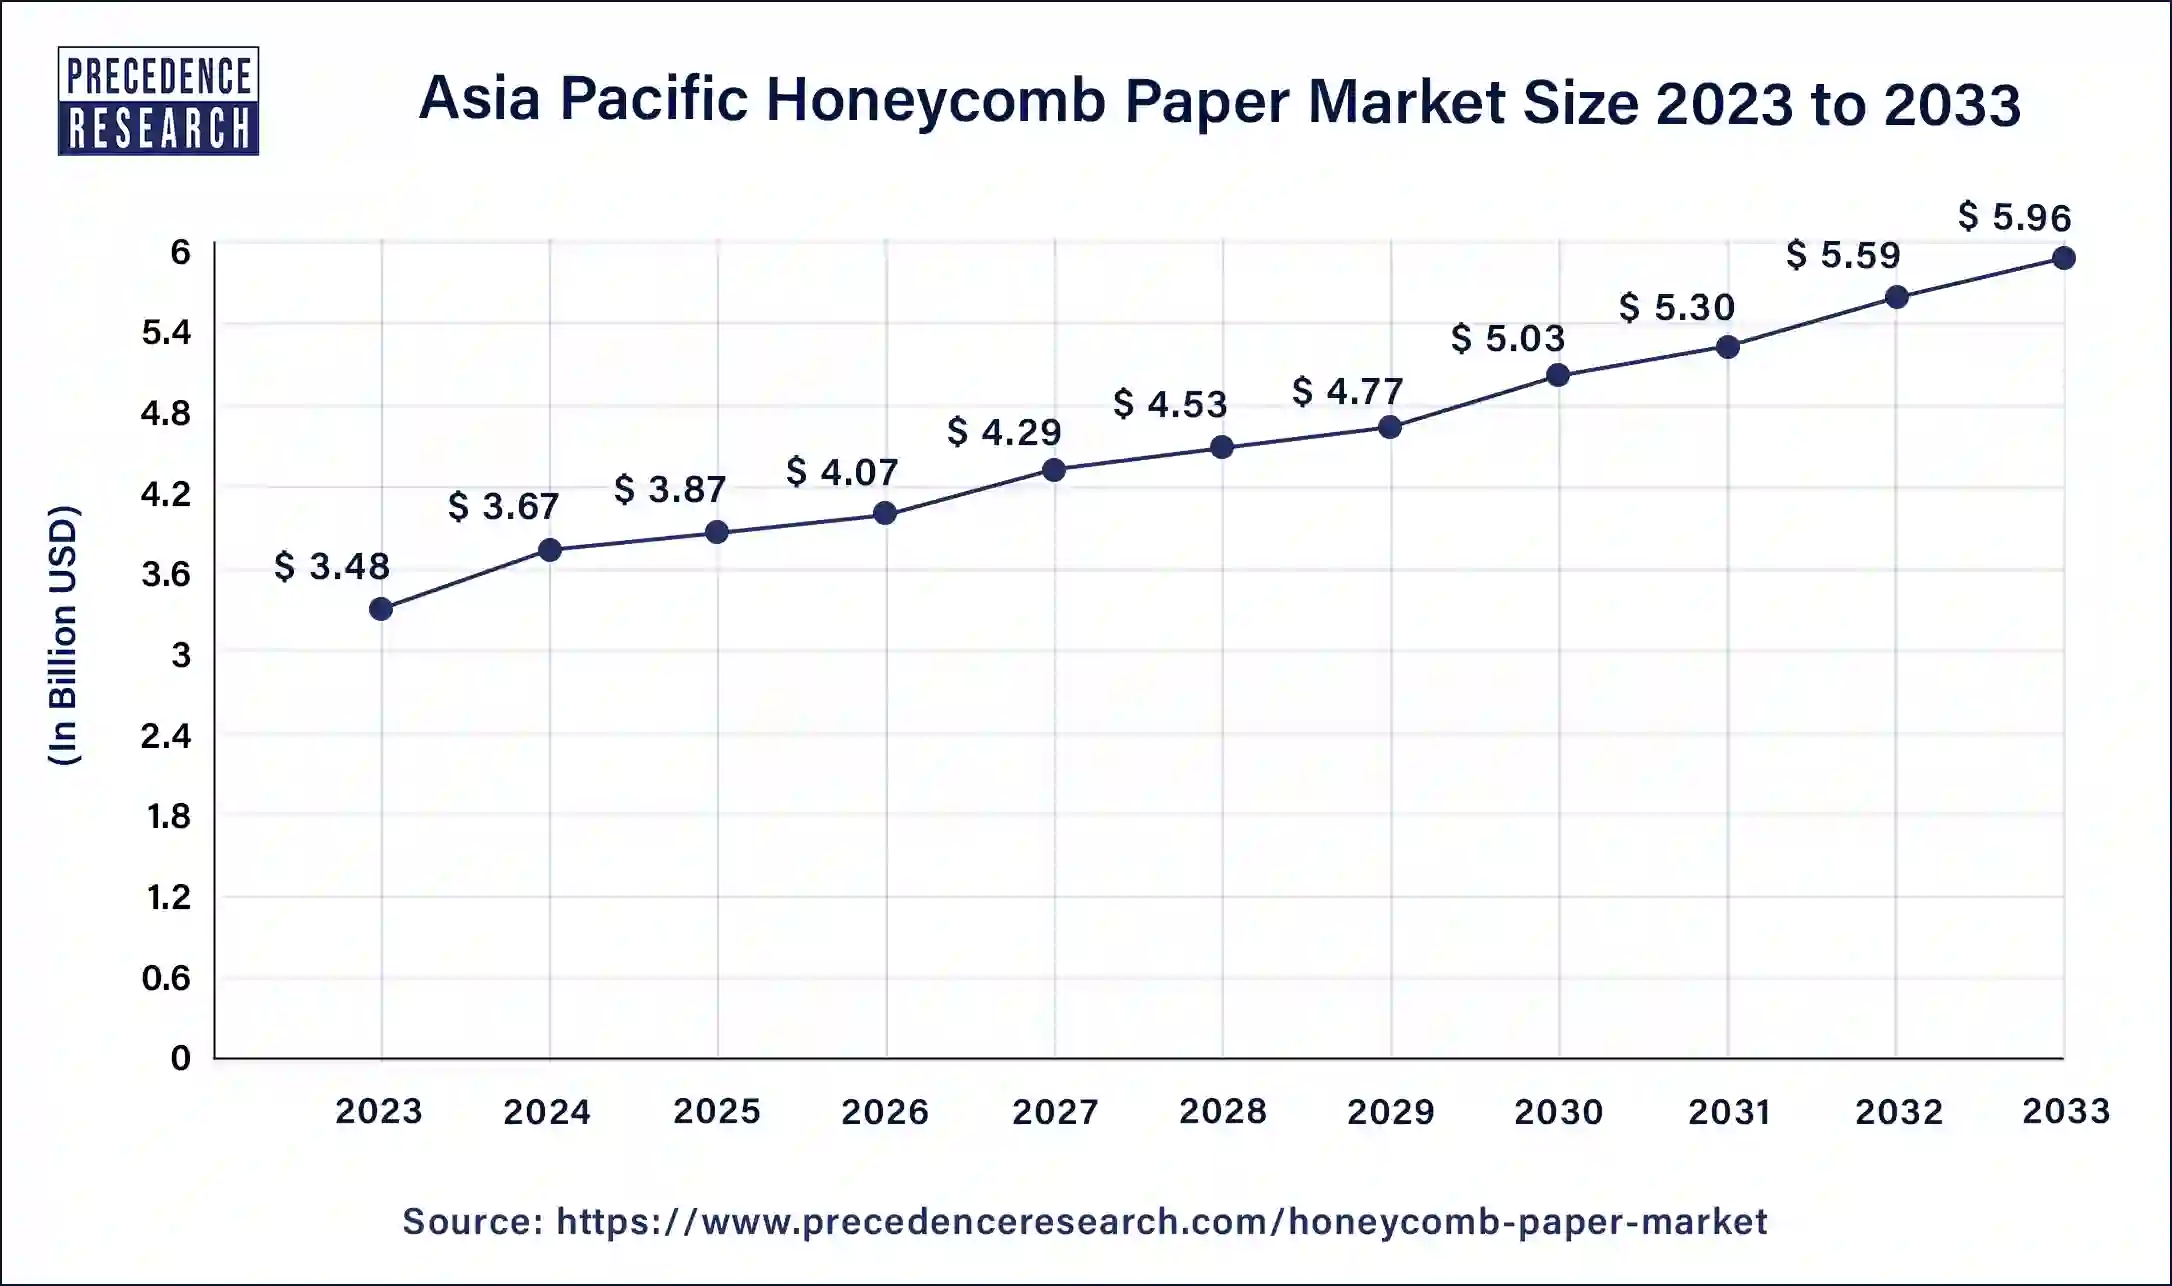 Asia Pacific Honeycomb Paper Market Size 2024 to 2033